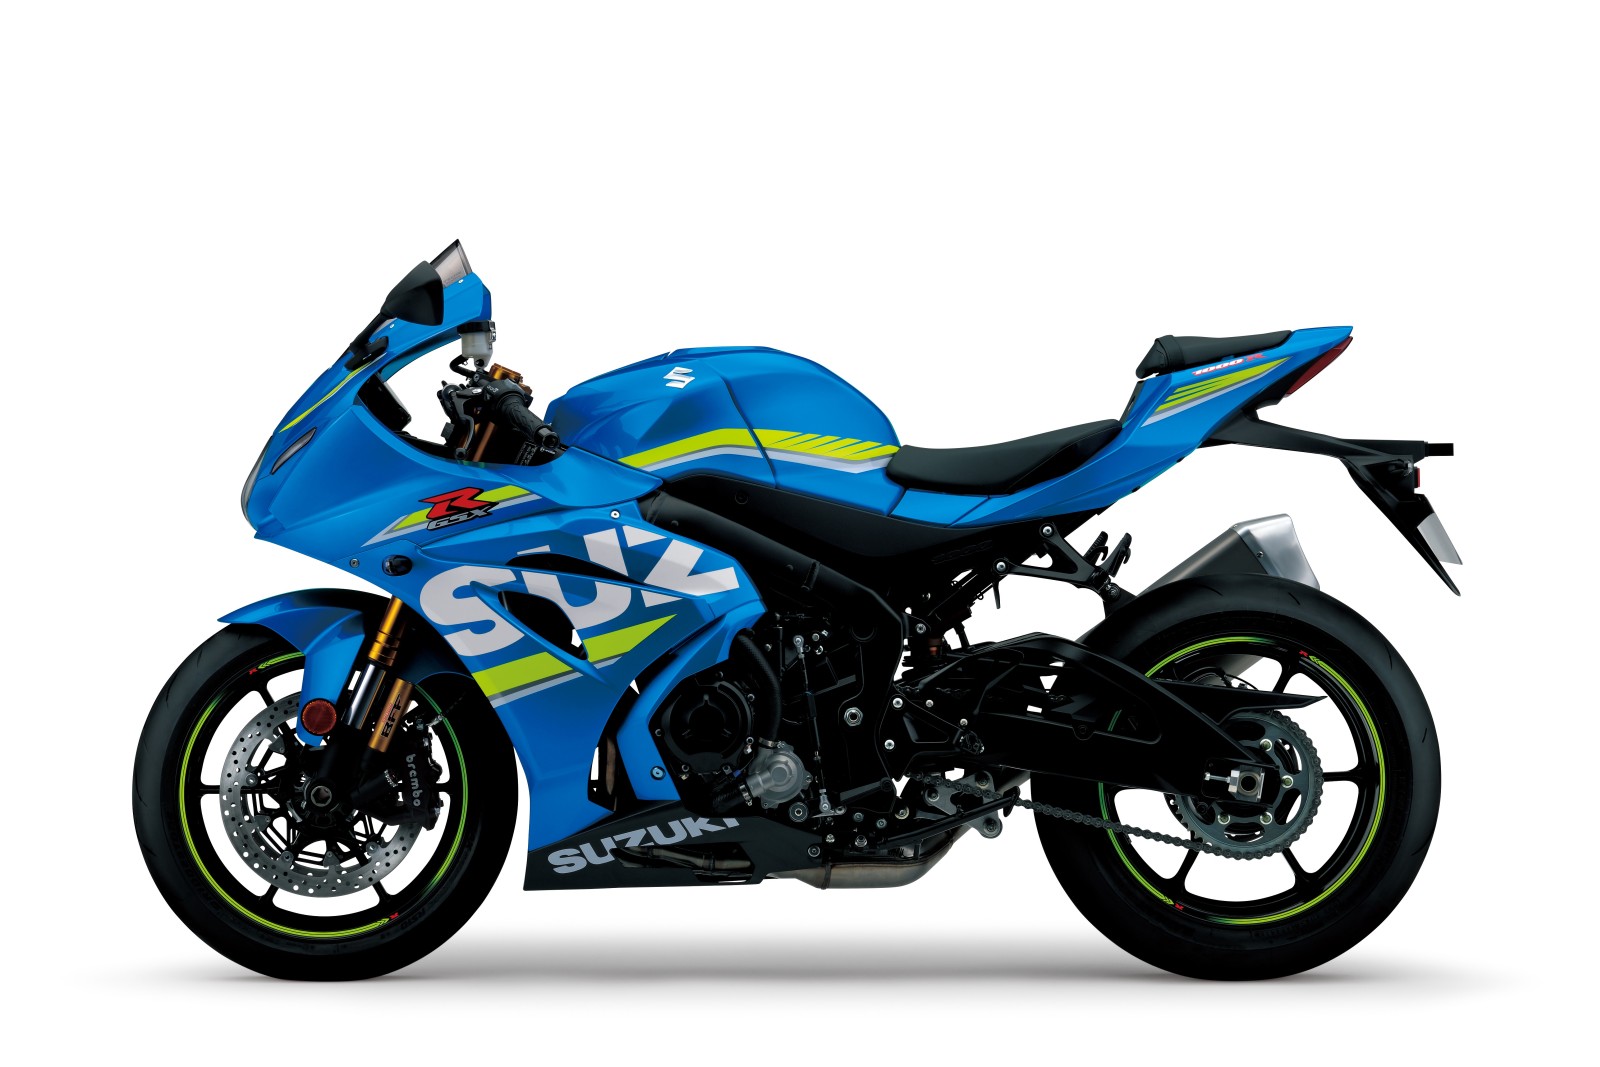 New 17 Suzuki Gsx R1000 And Gsx R1000r Launched In India Details Tech Specs And Prices